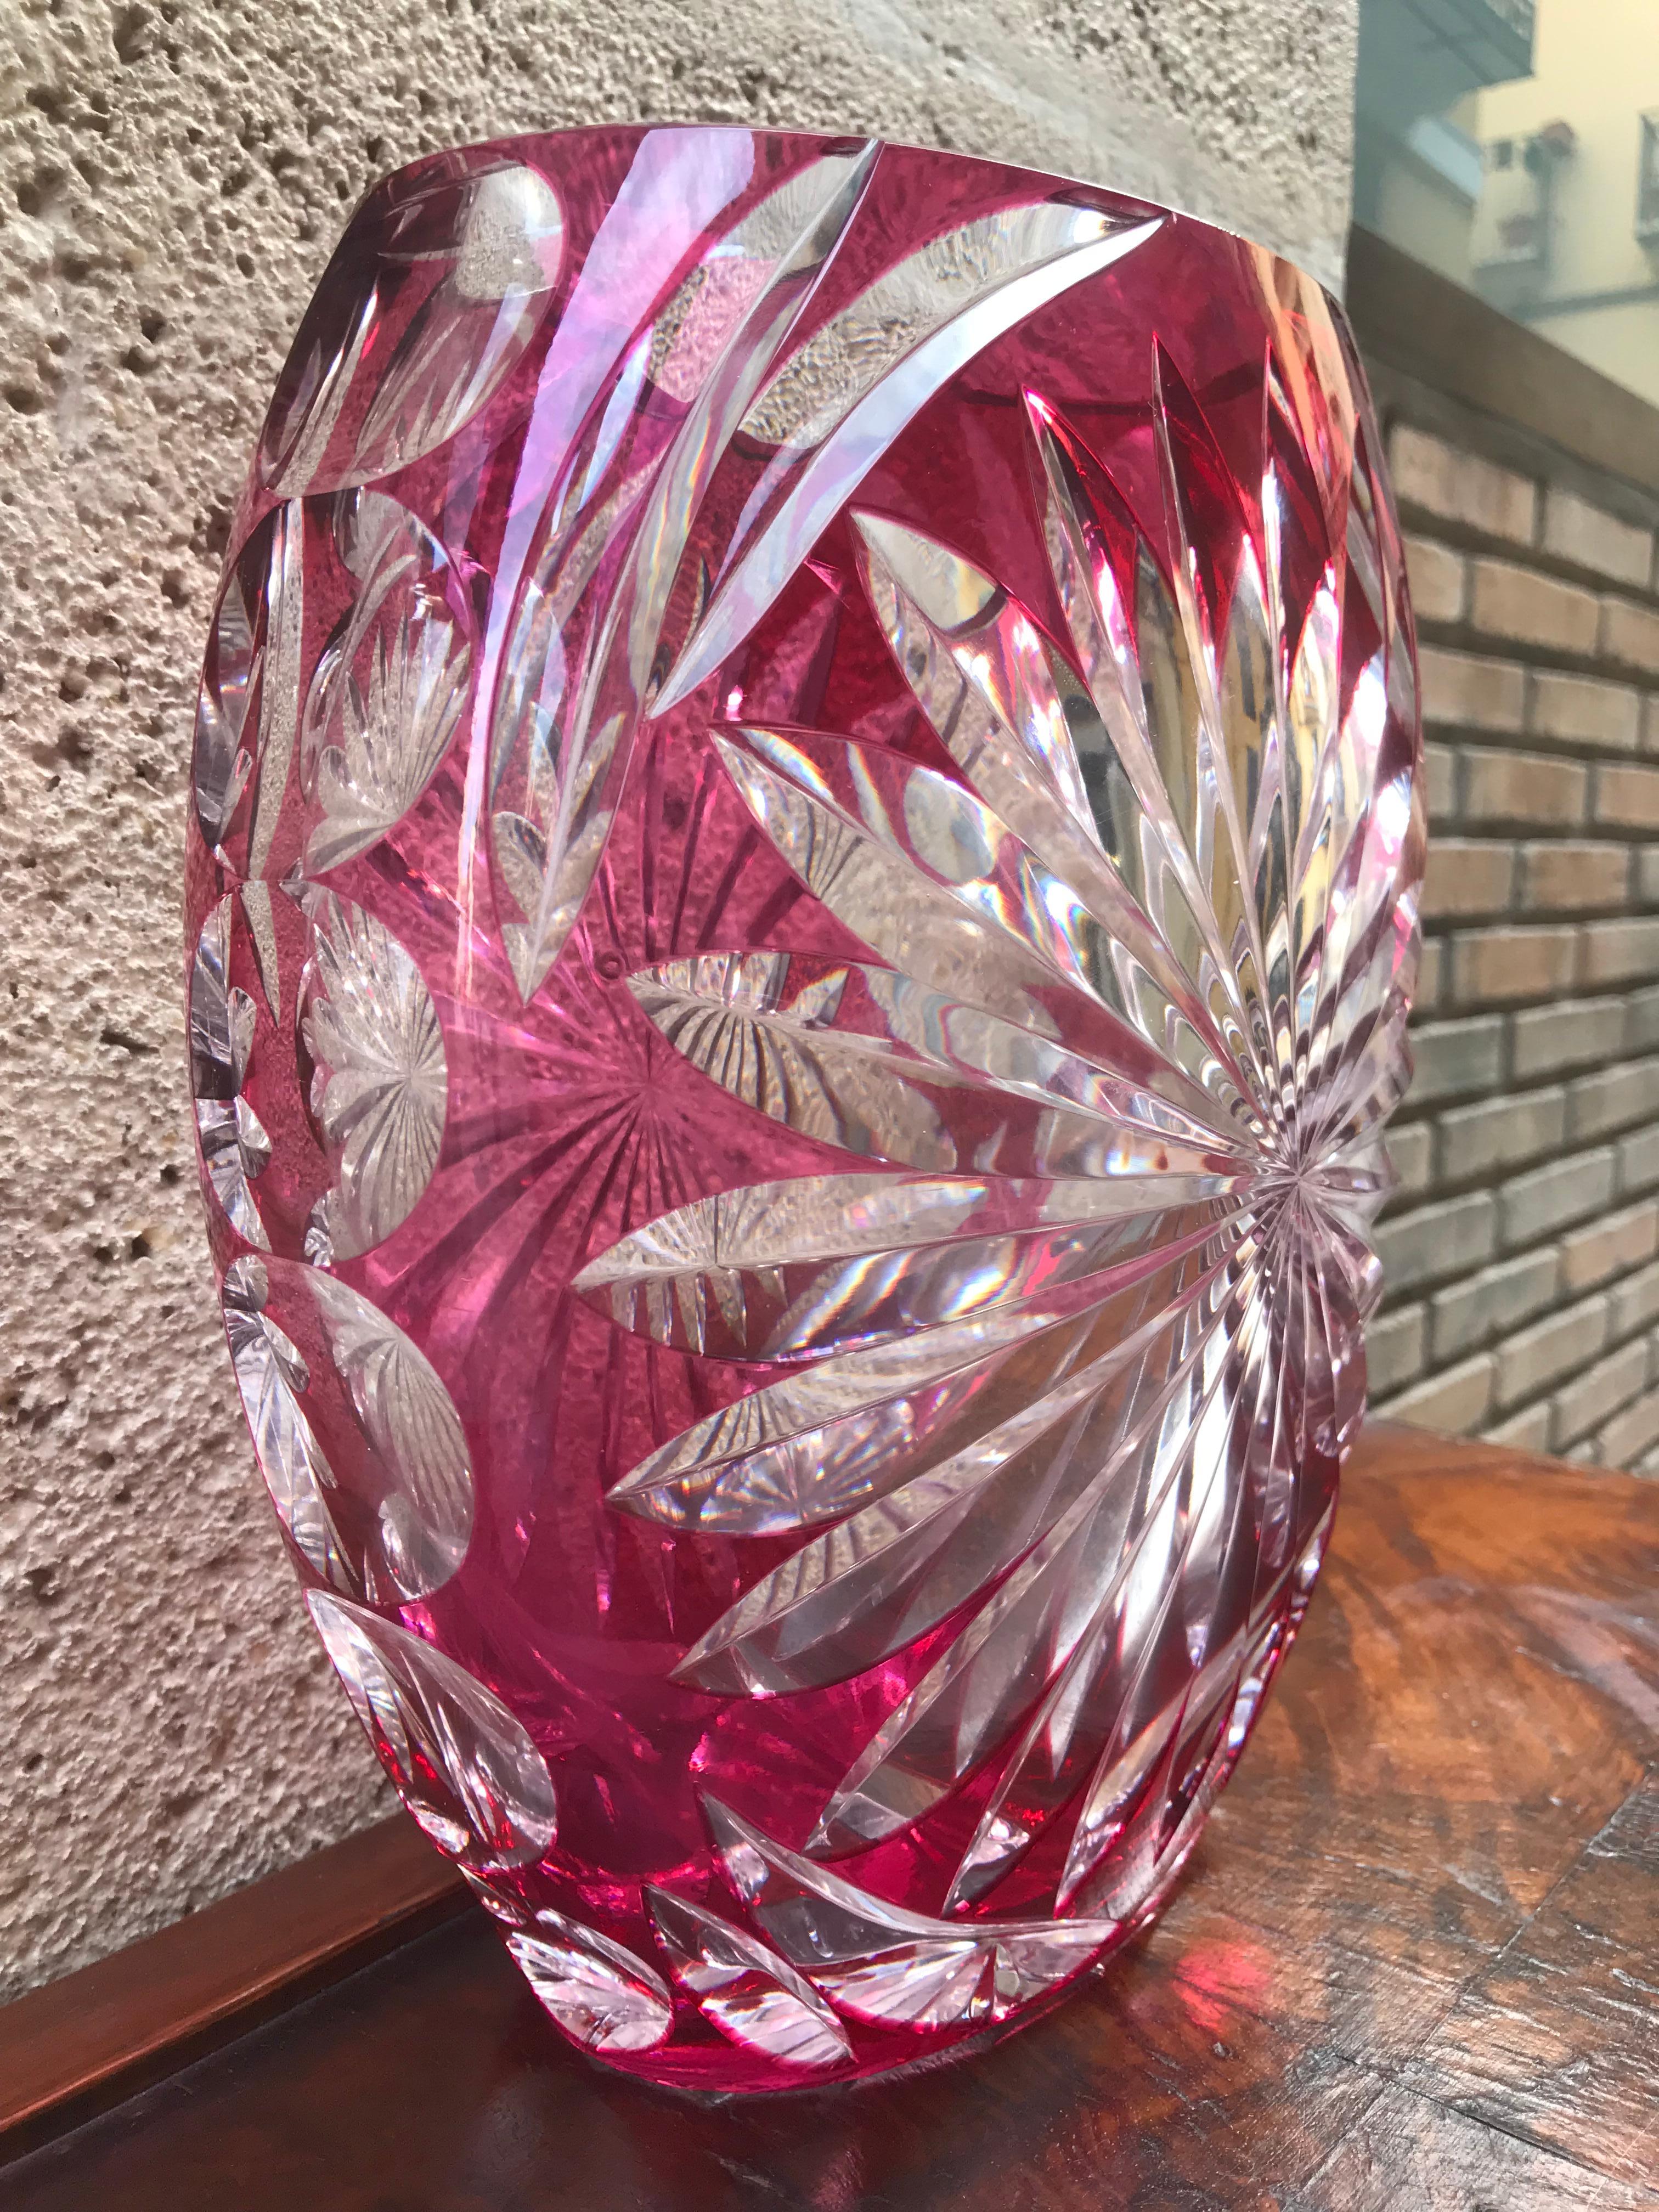 This is an European Art Deco vase, made in the 1930s by Val Saint Lambert.
It is made of carved and beveled Murano glass.
It has a perfect fuchsia color to decorate any corner of our house and thus give a cheerful touch of color to the